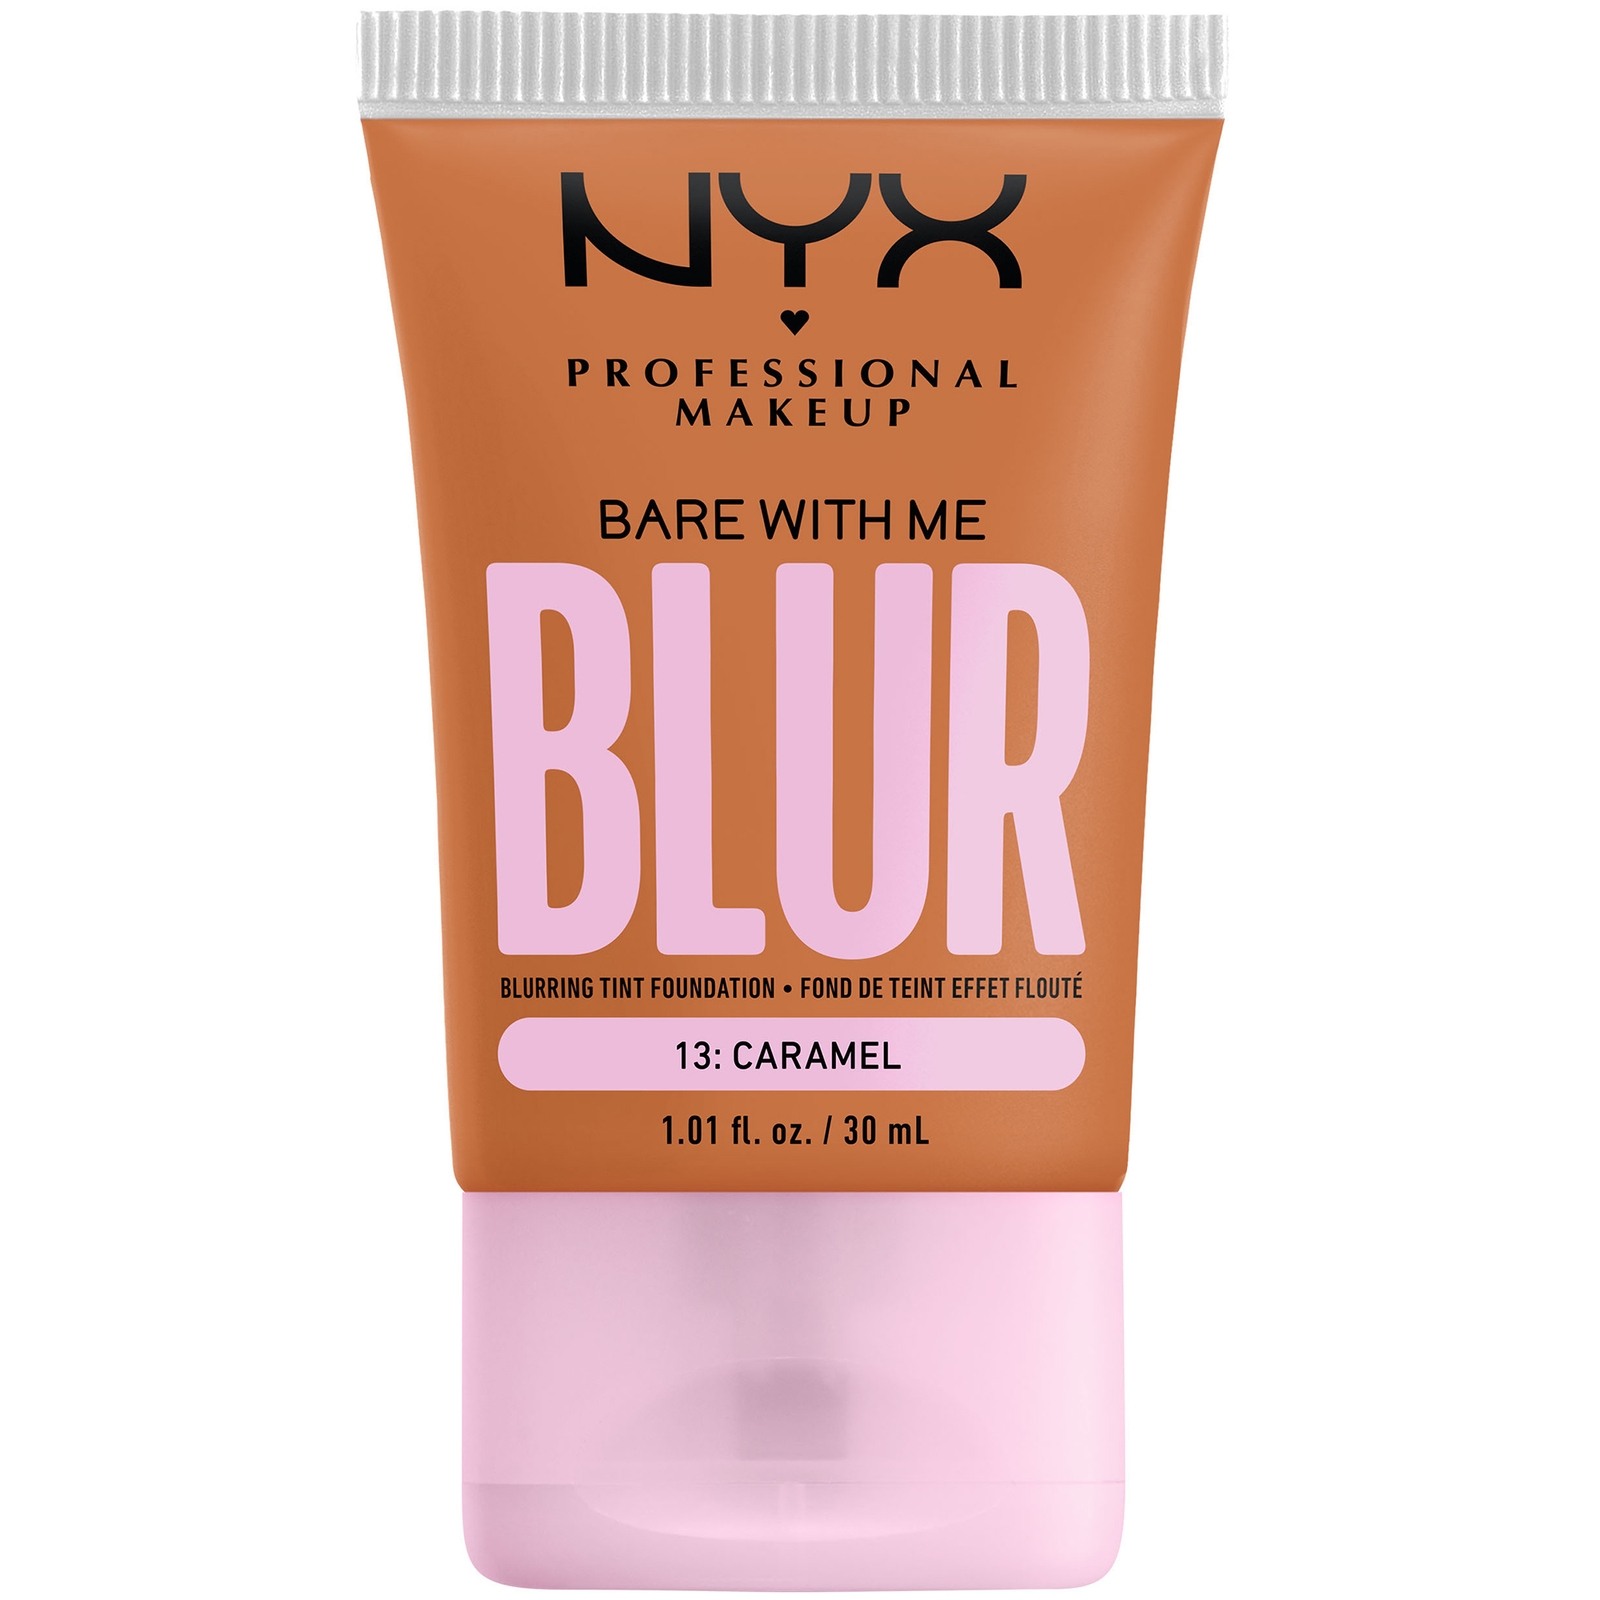 Nyx Professional Makeup Bare With Me Blur Tint Foundation 30ml (varios Shades) - Caramel In White